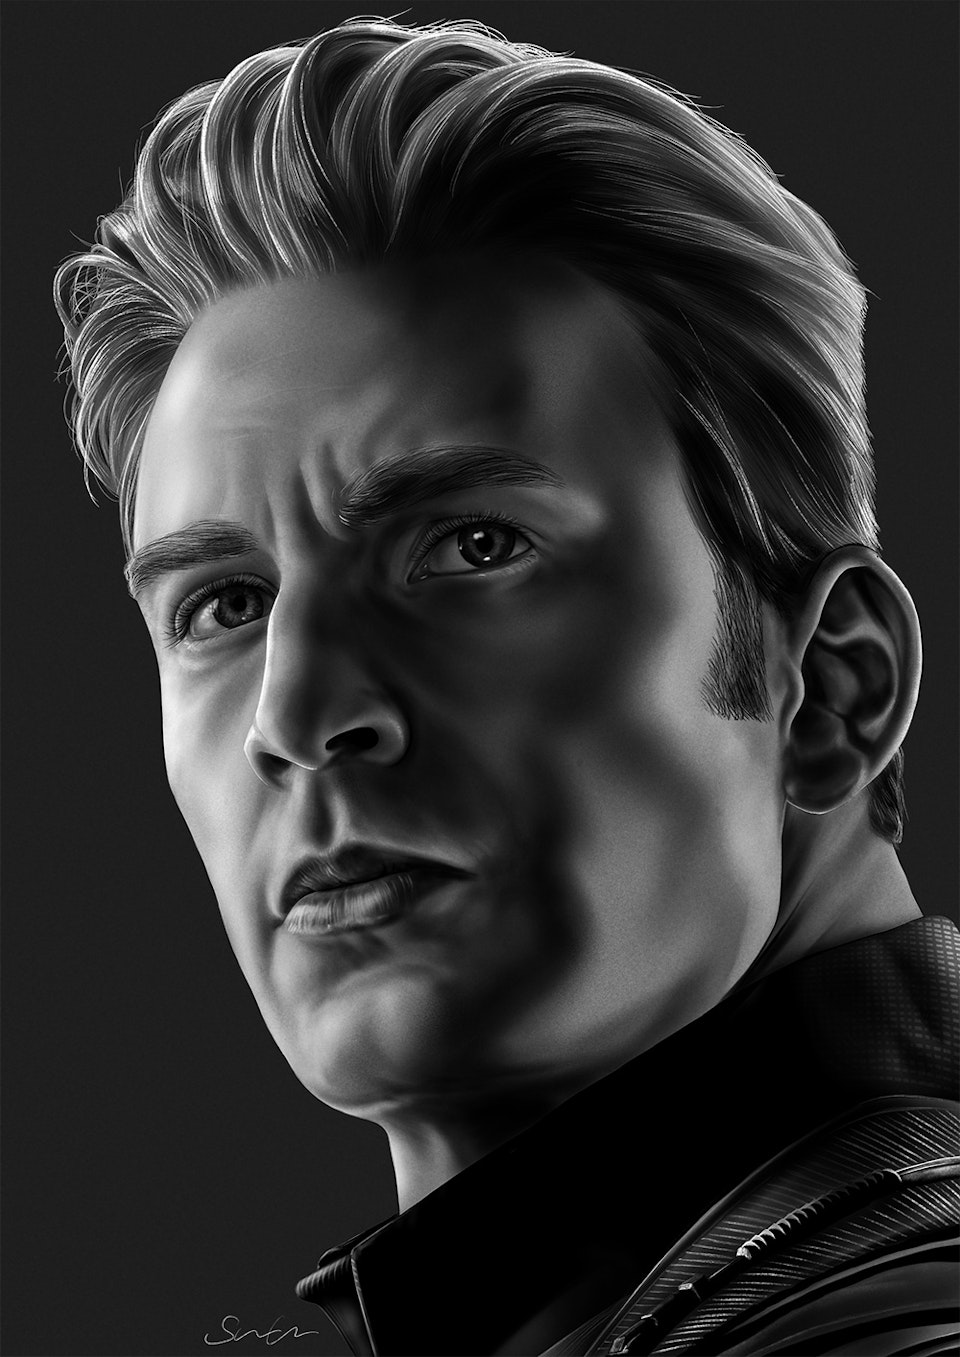 Black and White Character Portraits - Steve Rogers - Captain America